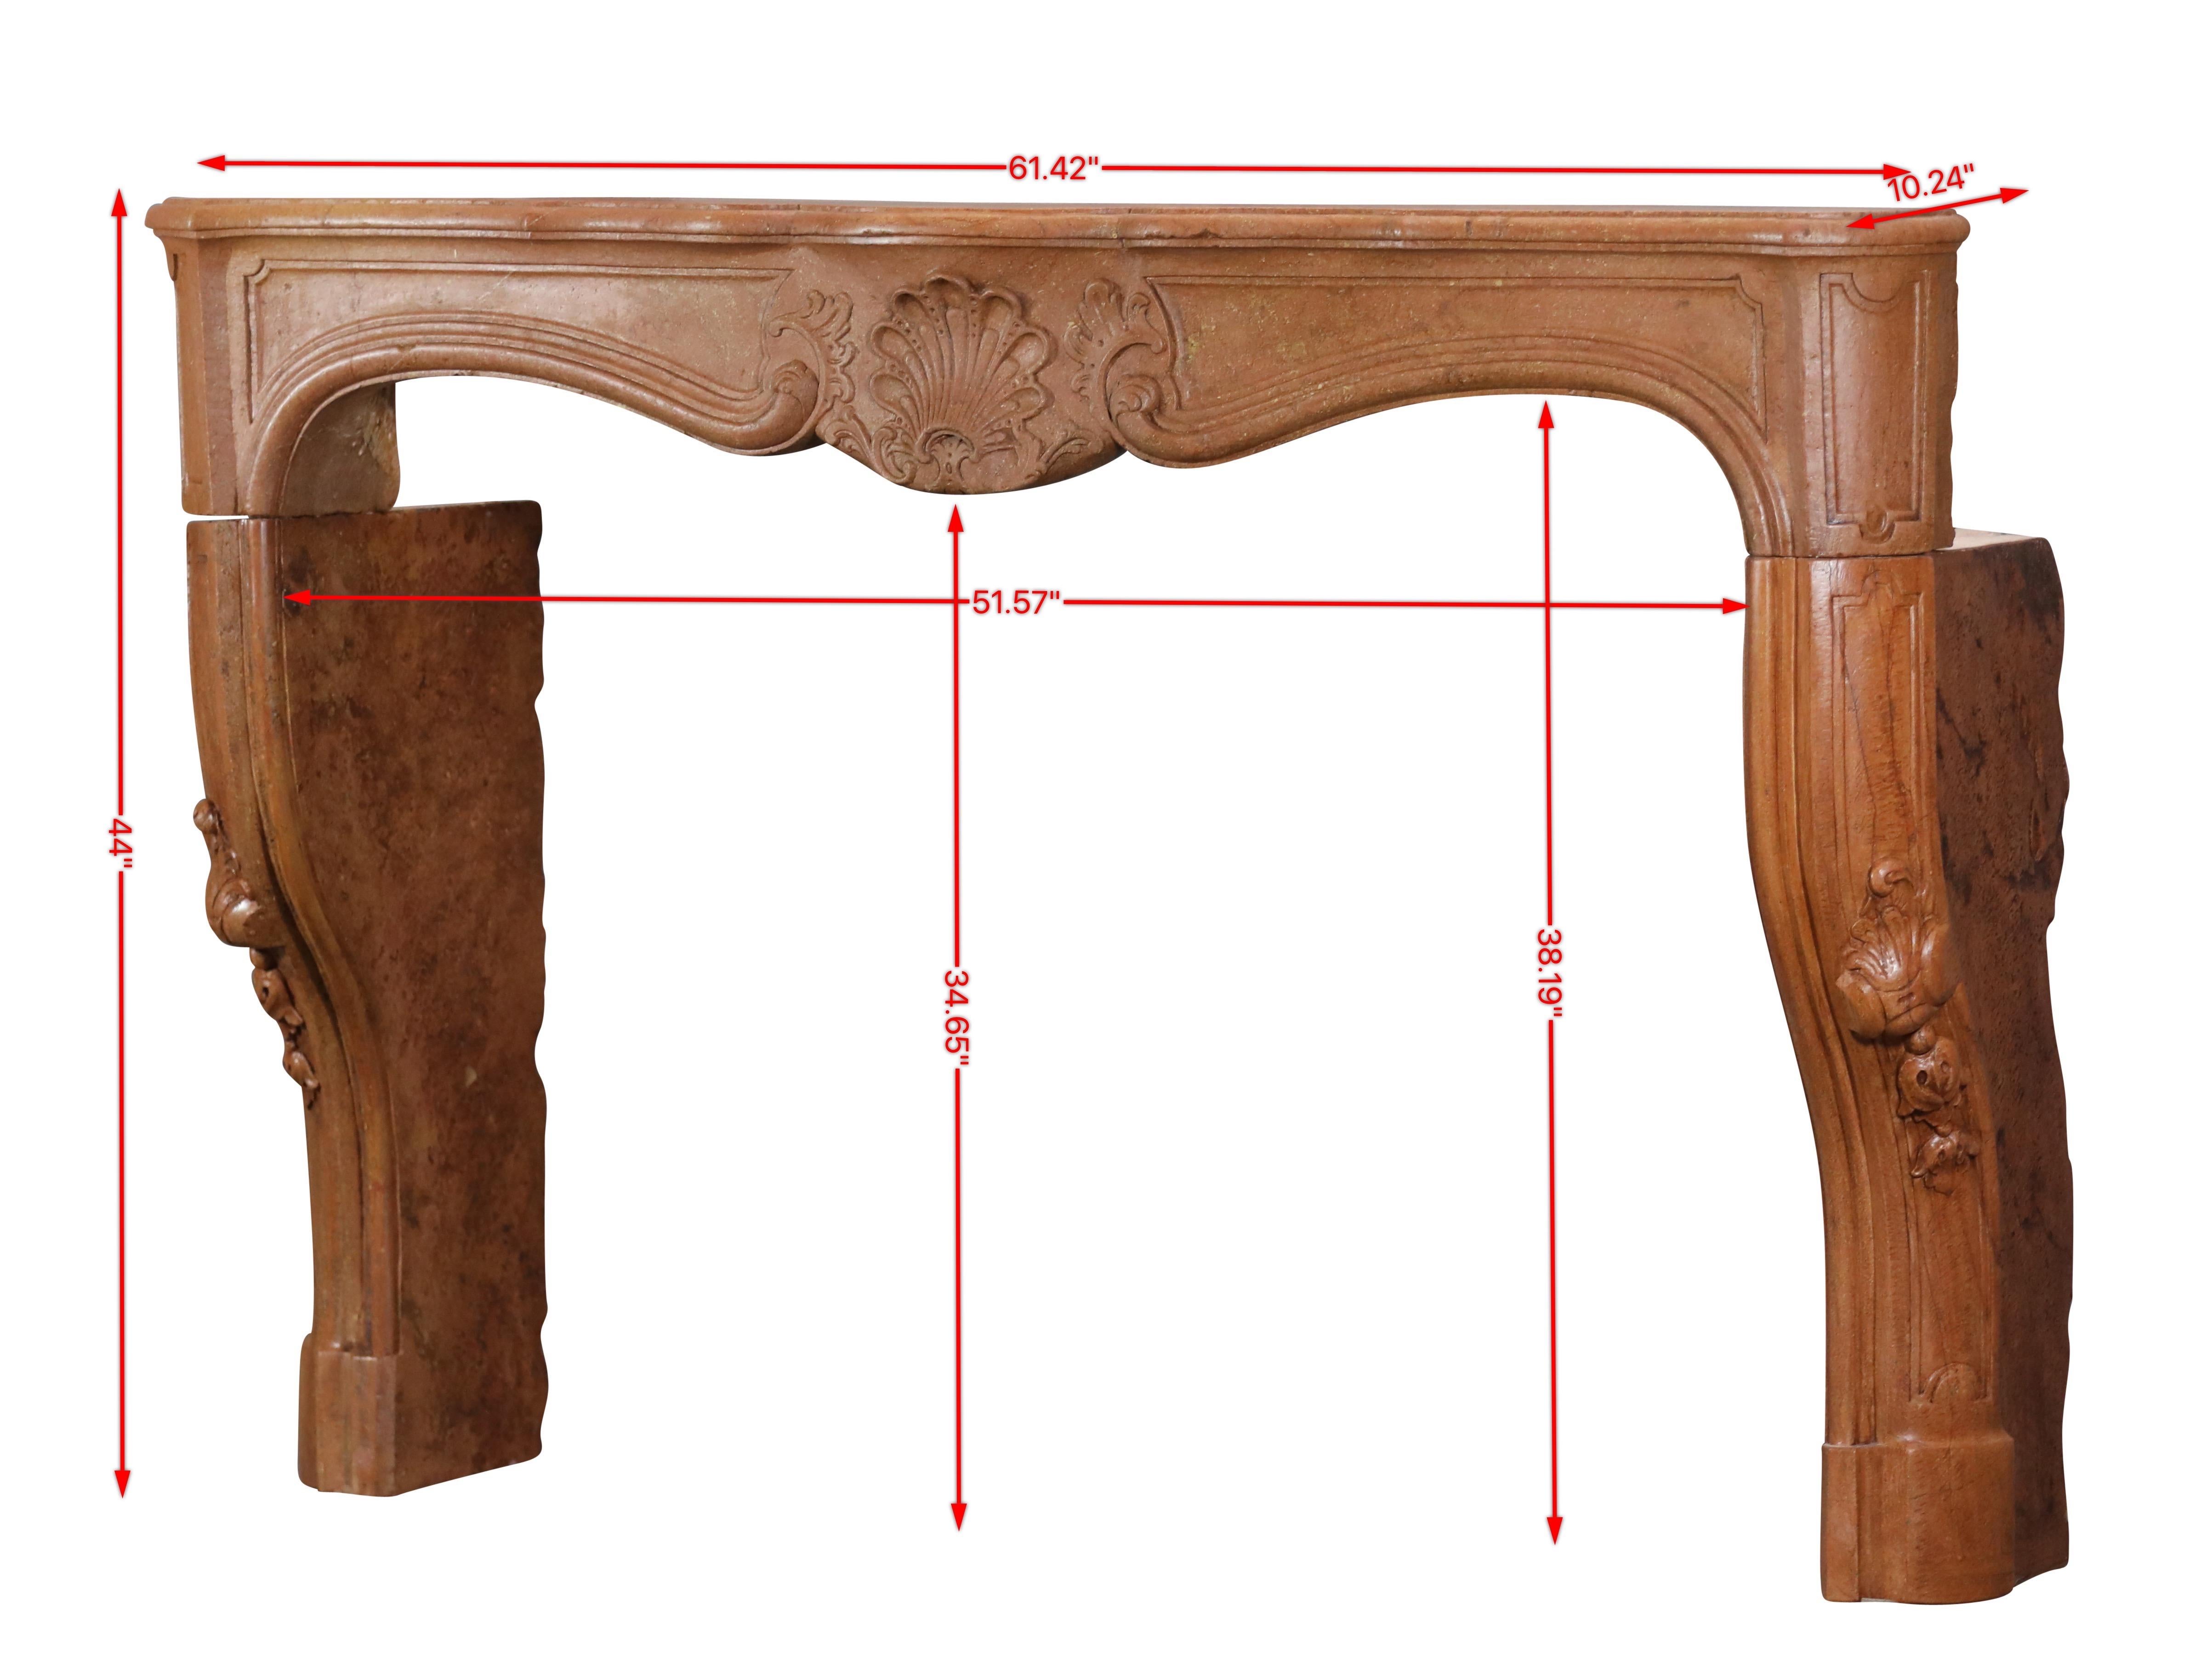 Original French cozy look authentic stone fireplace surround with fine and deep sculptural work from the 18th century period.
Beautiful and original marriage of the stone elements with some patina.
Rich regency eye-catcher.
Measurements:
156 cm